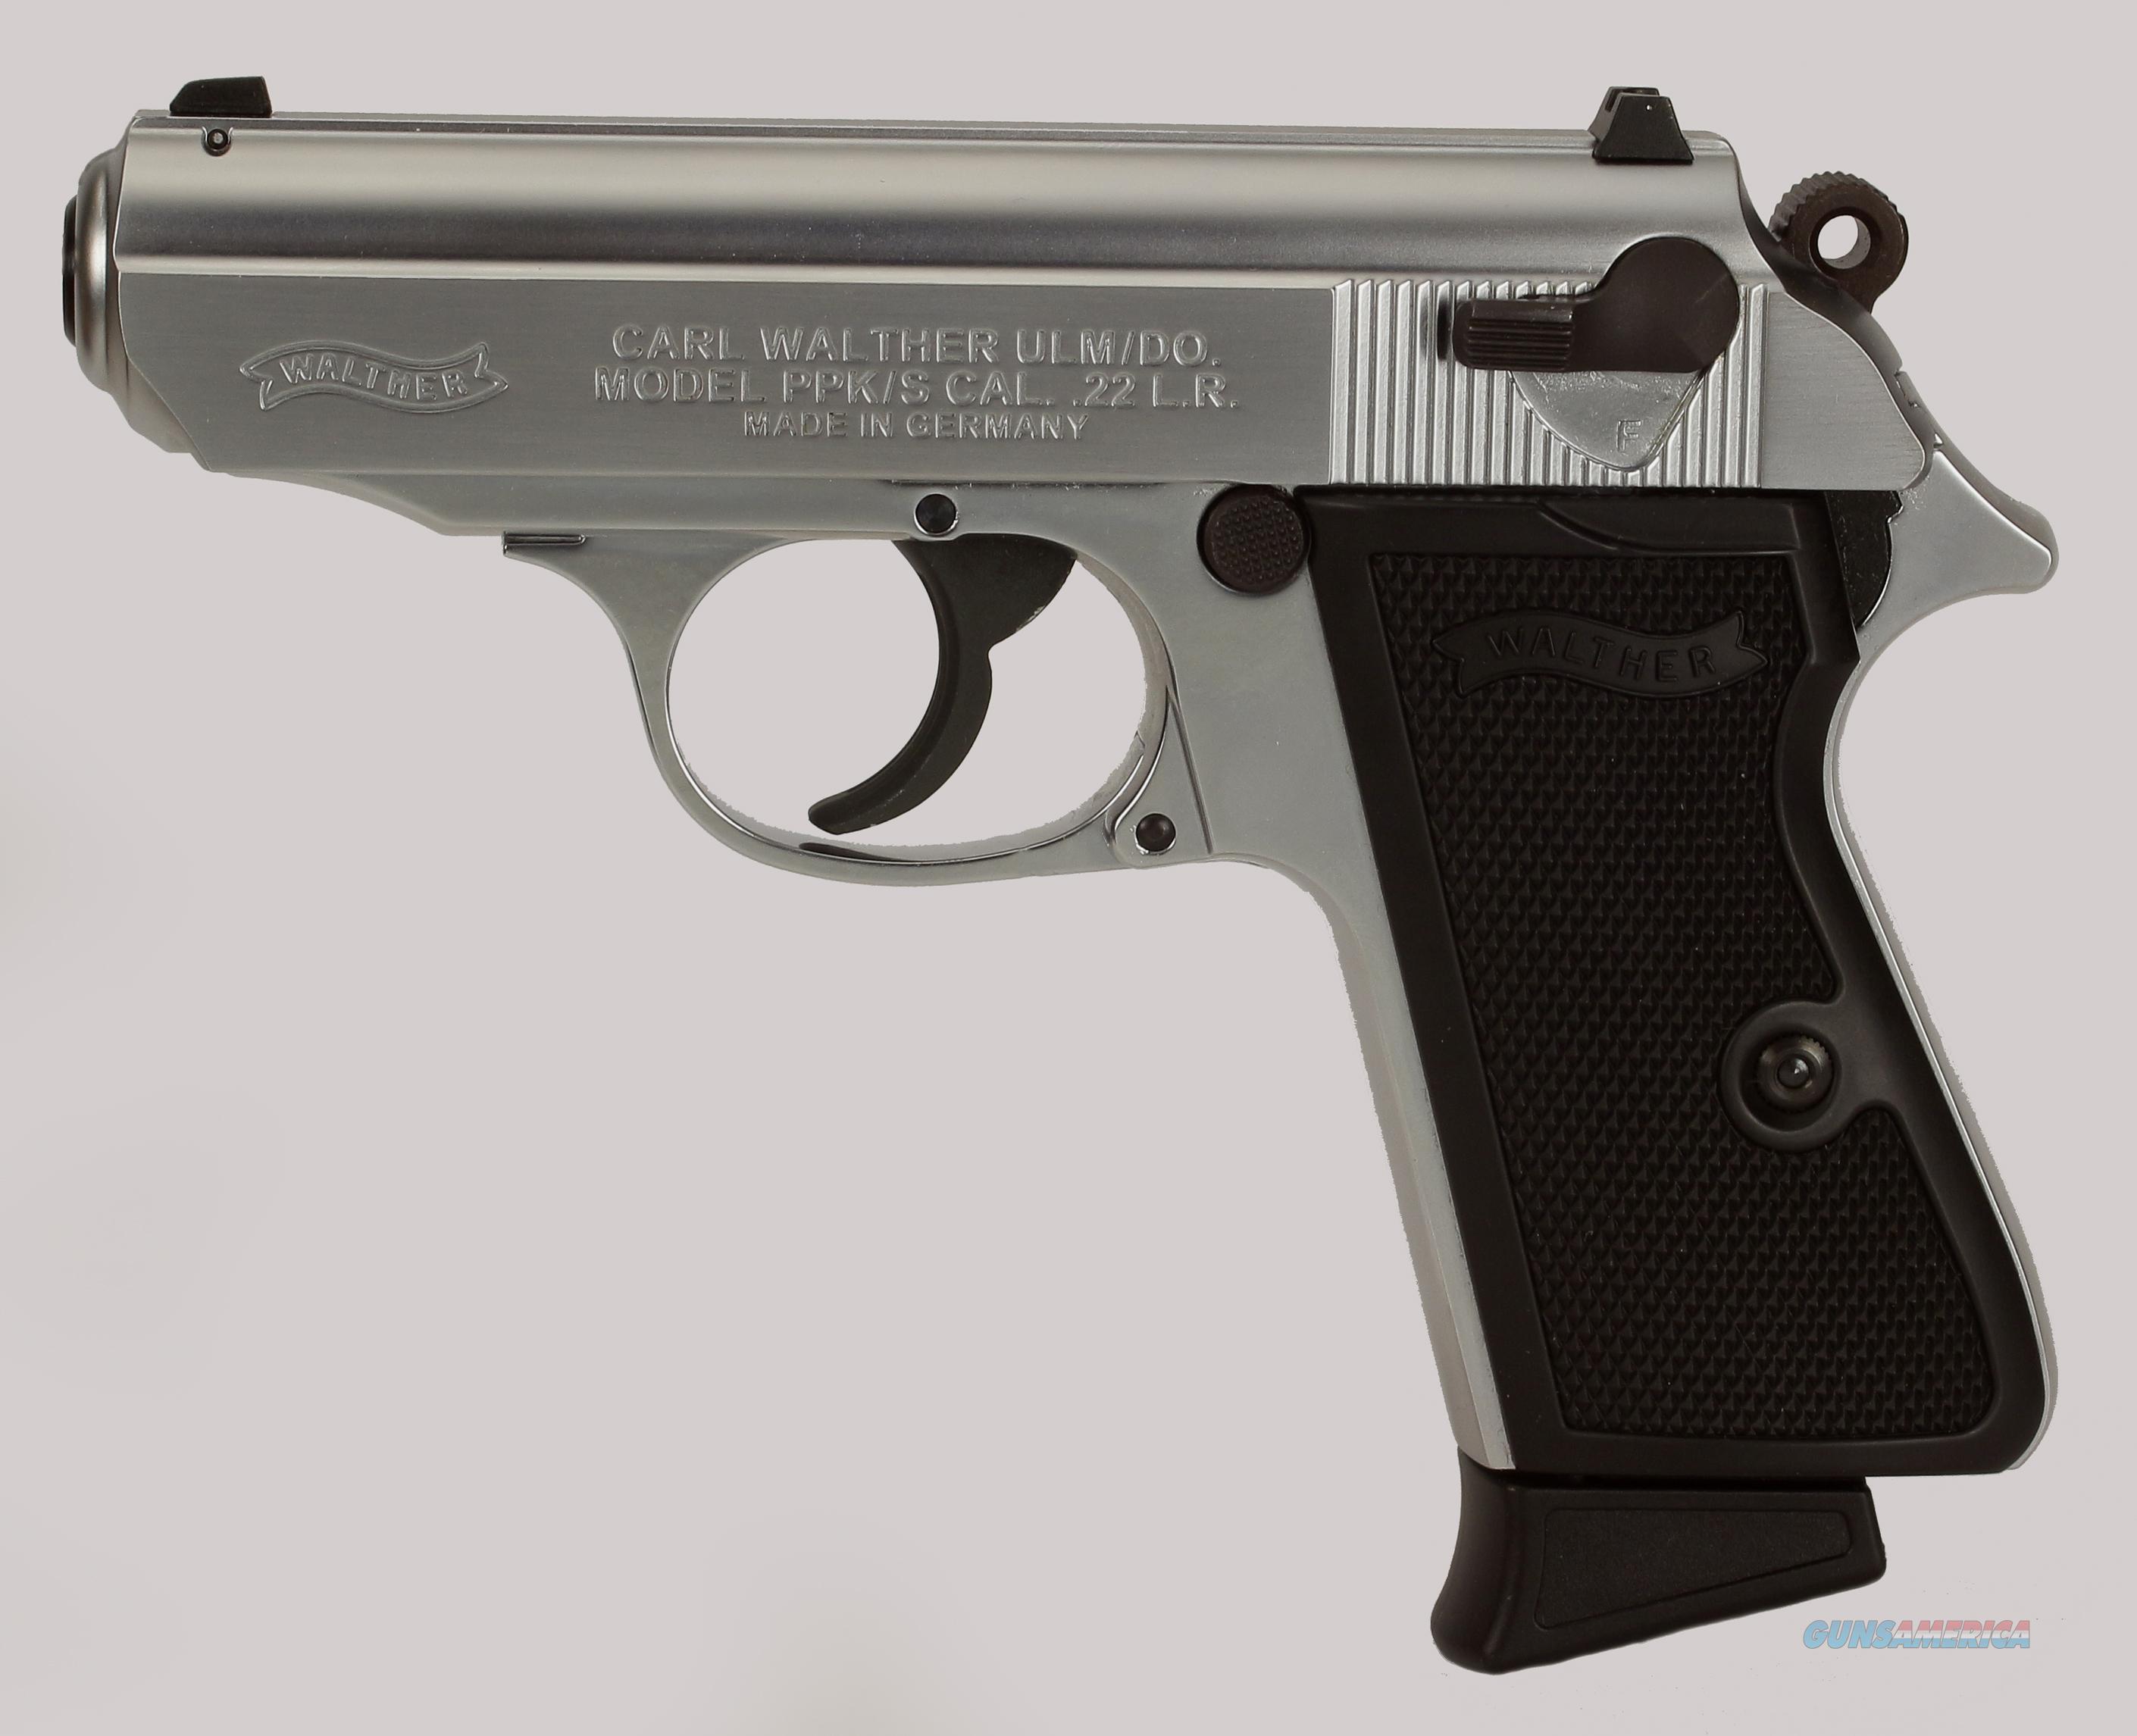 Walther ppk s. Walther 380 auto. Walther PPK Макаров. Walther Sport Pistol. Магазин для Walther PPK/S.